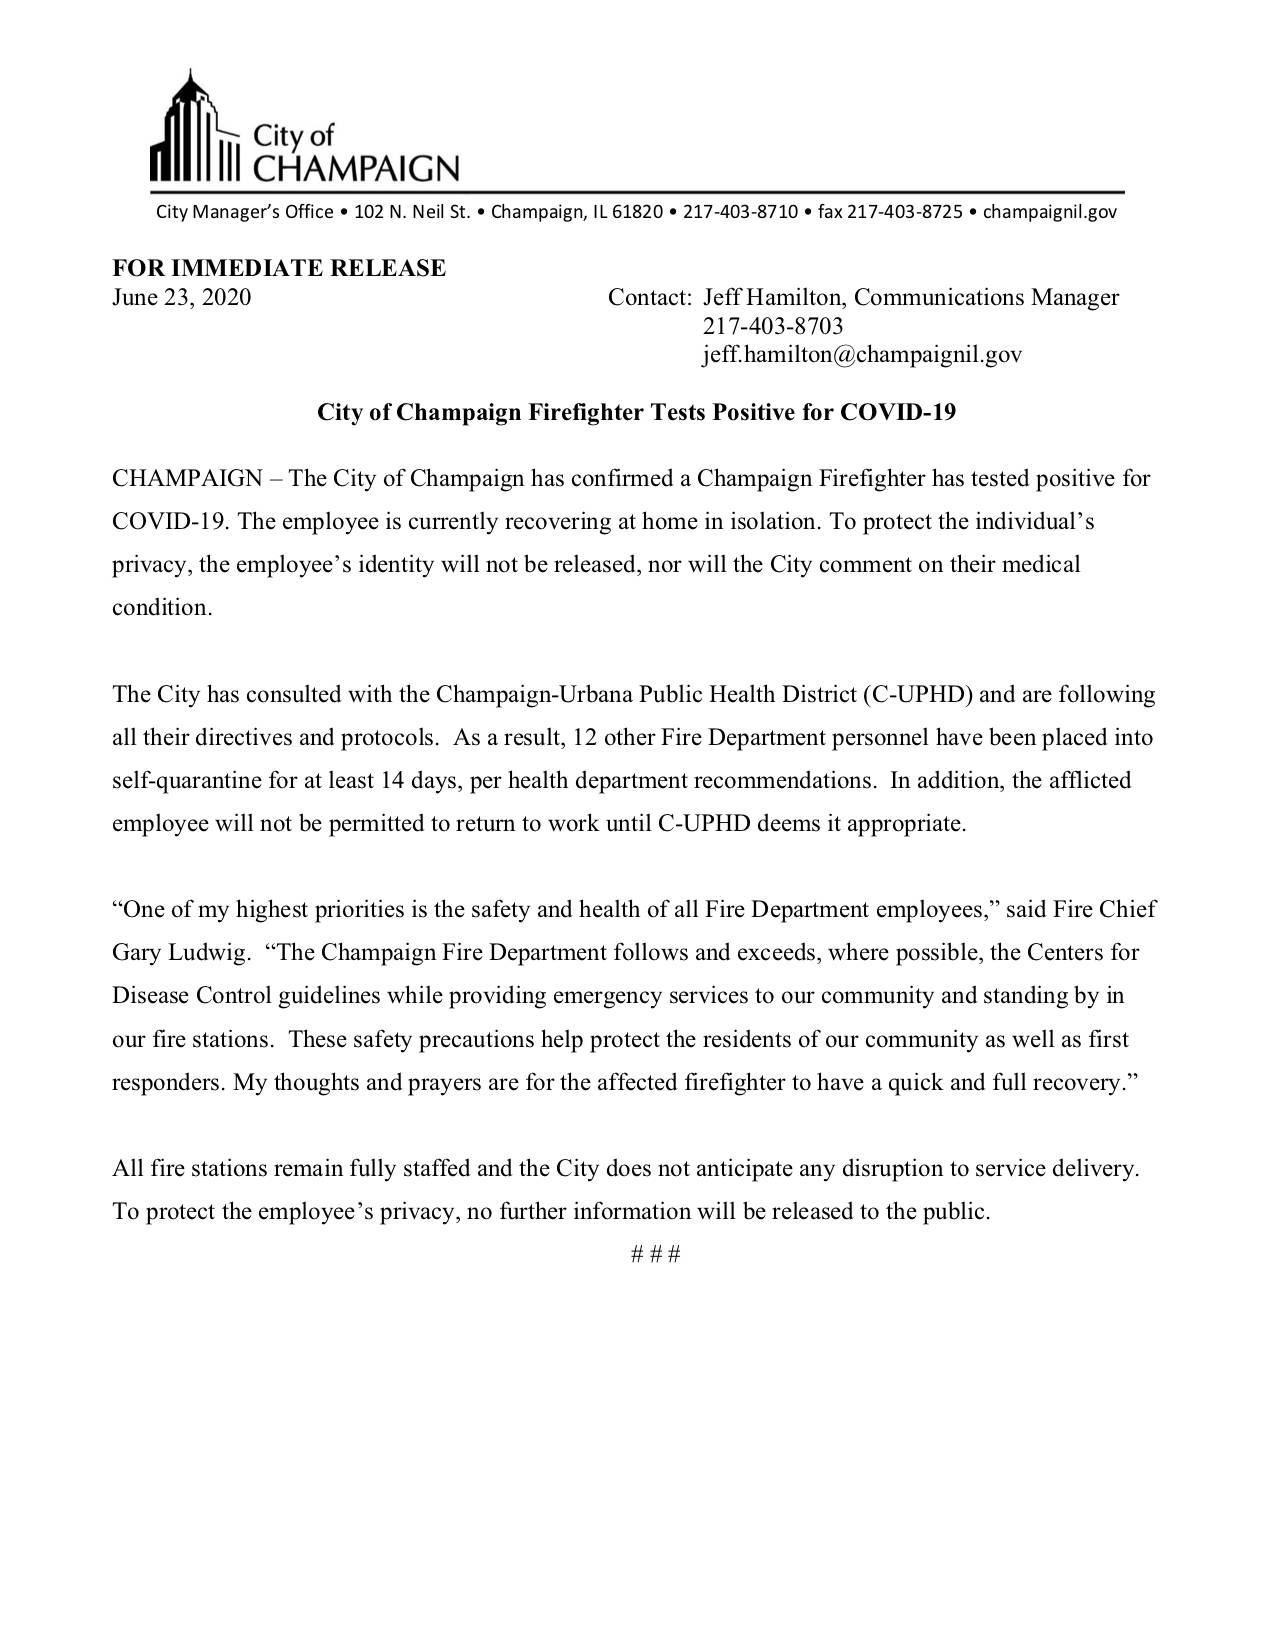 Press release stating that 12 firefighters in Champaign are quarantined for 14 days because of COVID-19. From the City of Champaign.